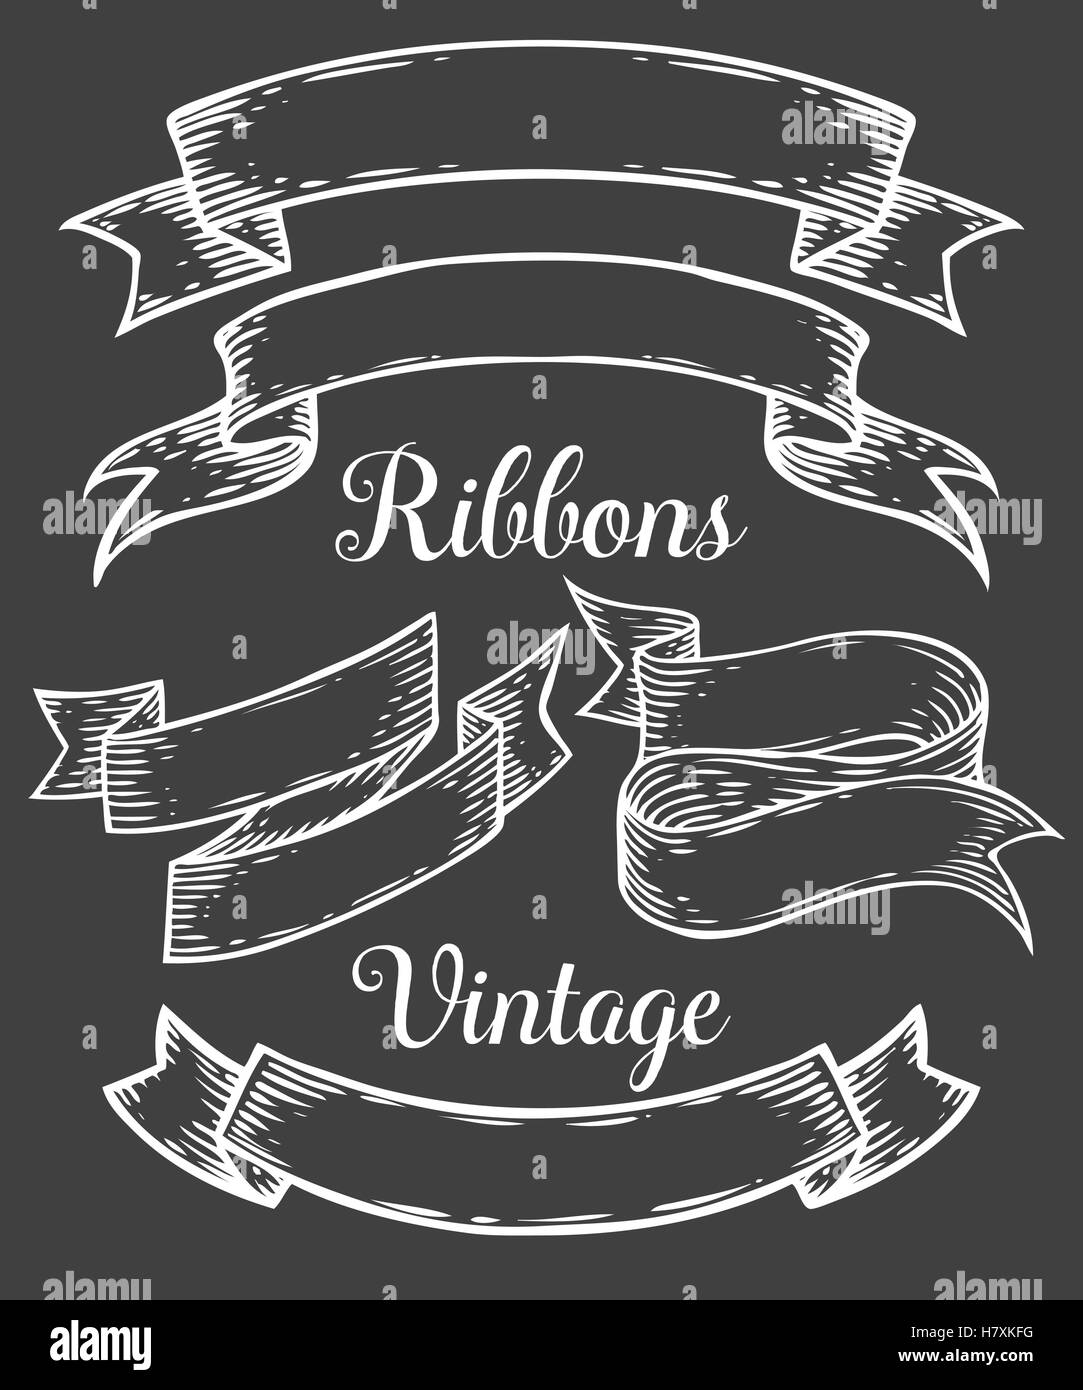 Ribbon retro vintage hand drawn illustration vector set. Sketch banners, old school style. For decoration, scrapbook and web, mo Stock Vector